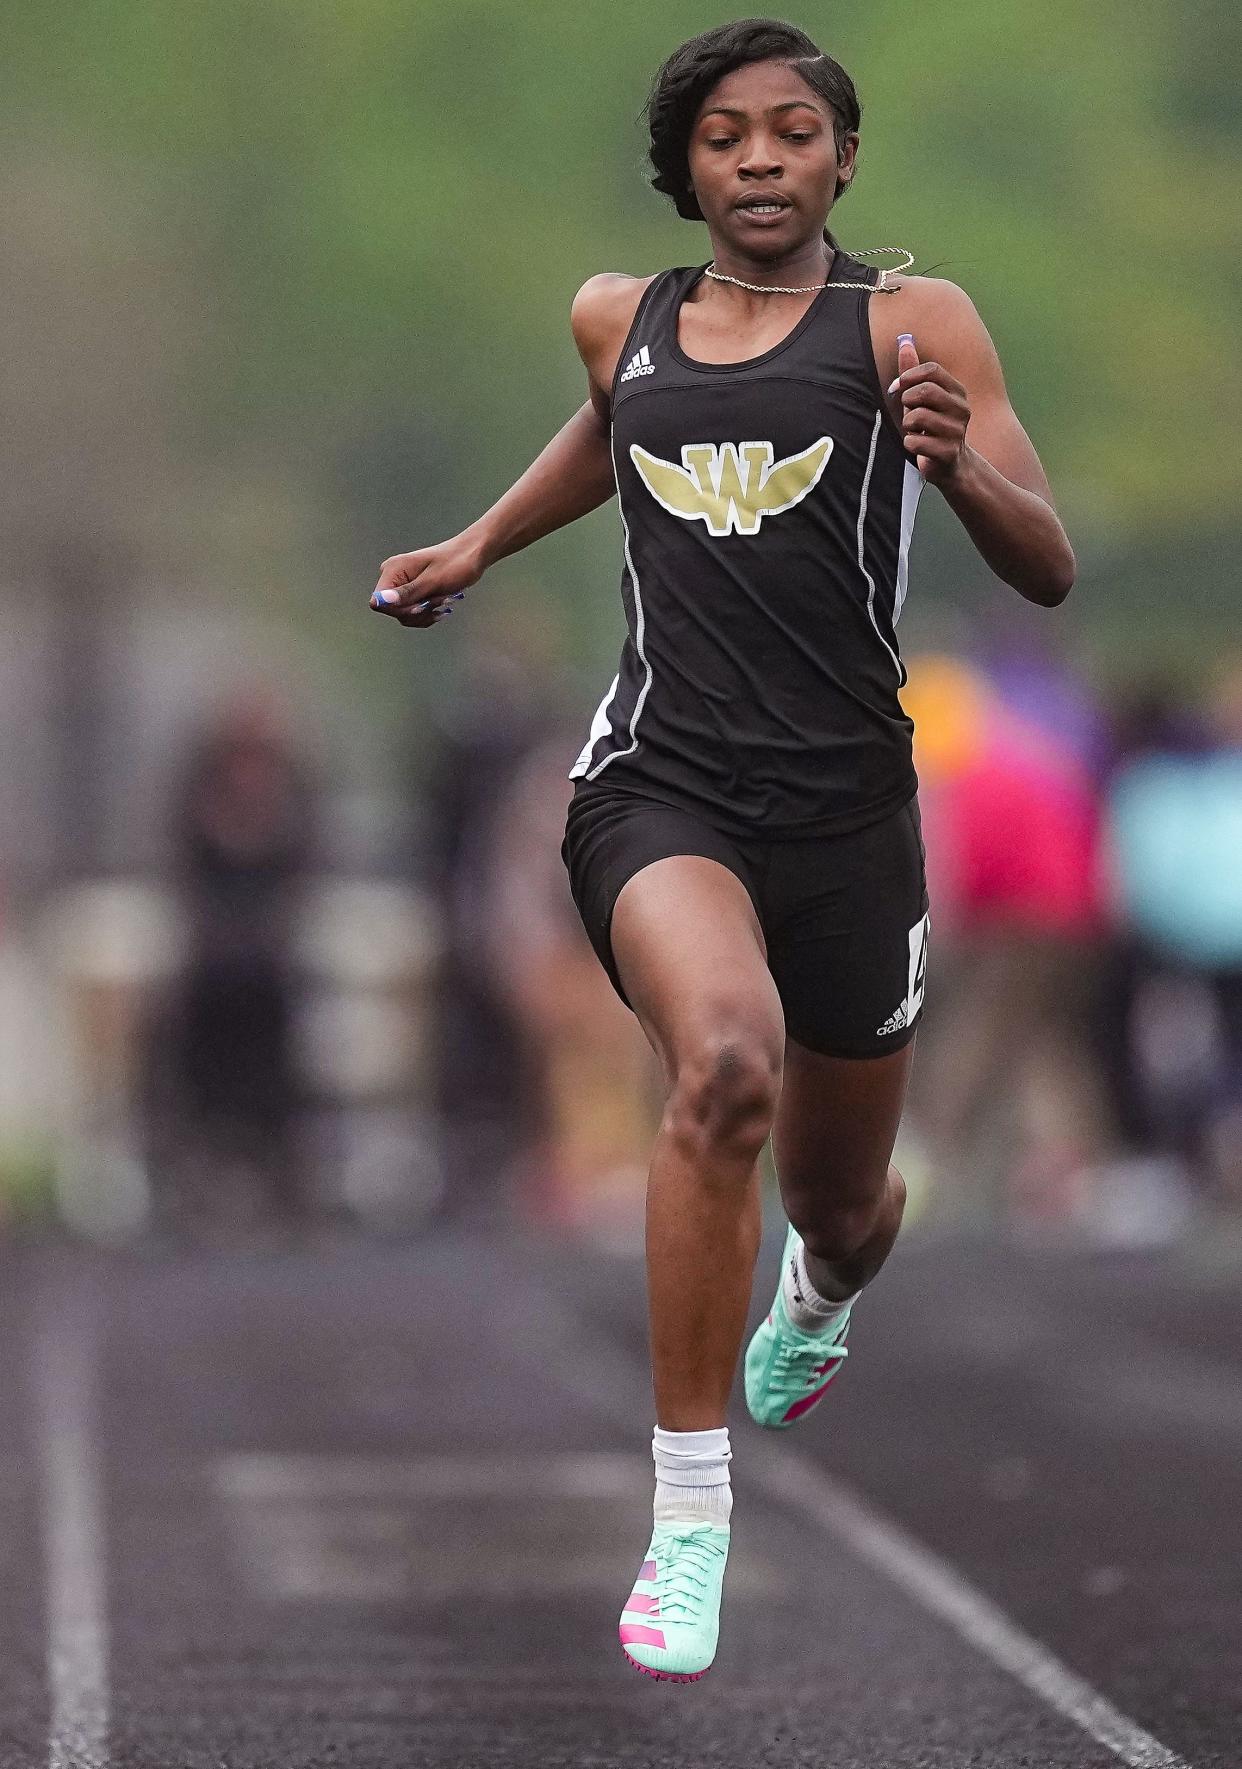 Warren Central's Jila Vaden competes in the 100 meter dash during the MIC Outdoor Championship on Friday, April 28, 2023 at Warren Central High School in Indianapolis.